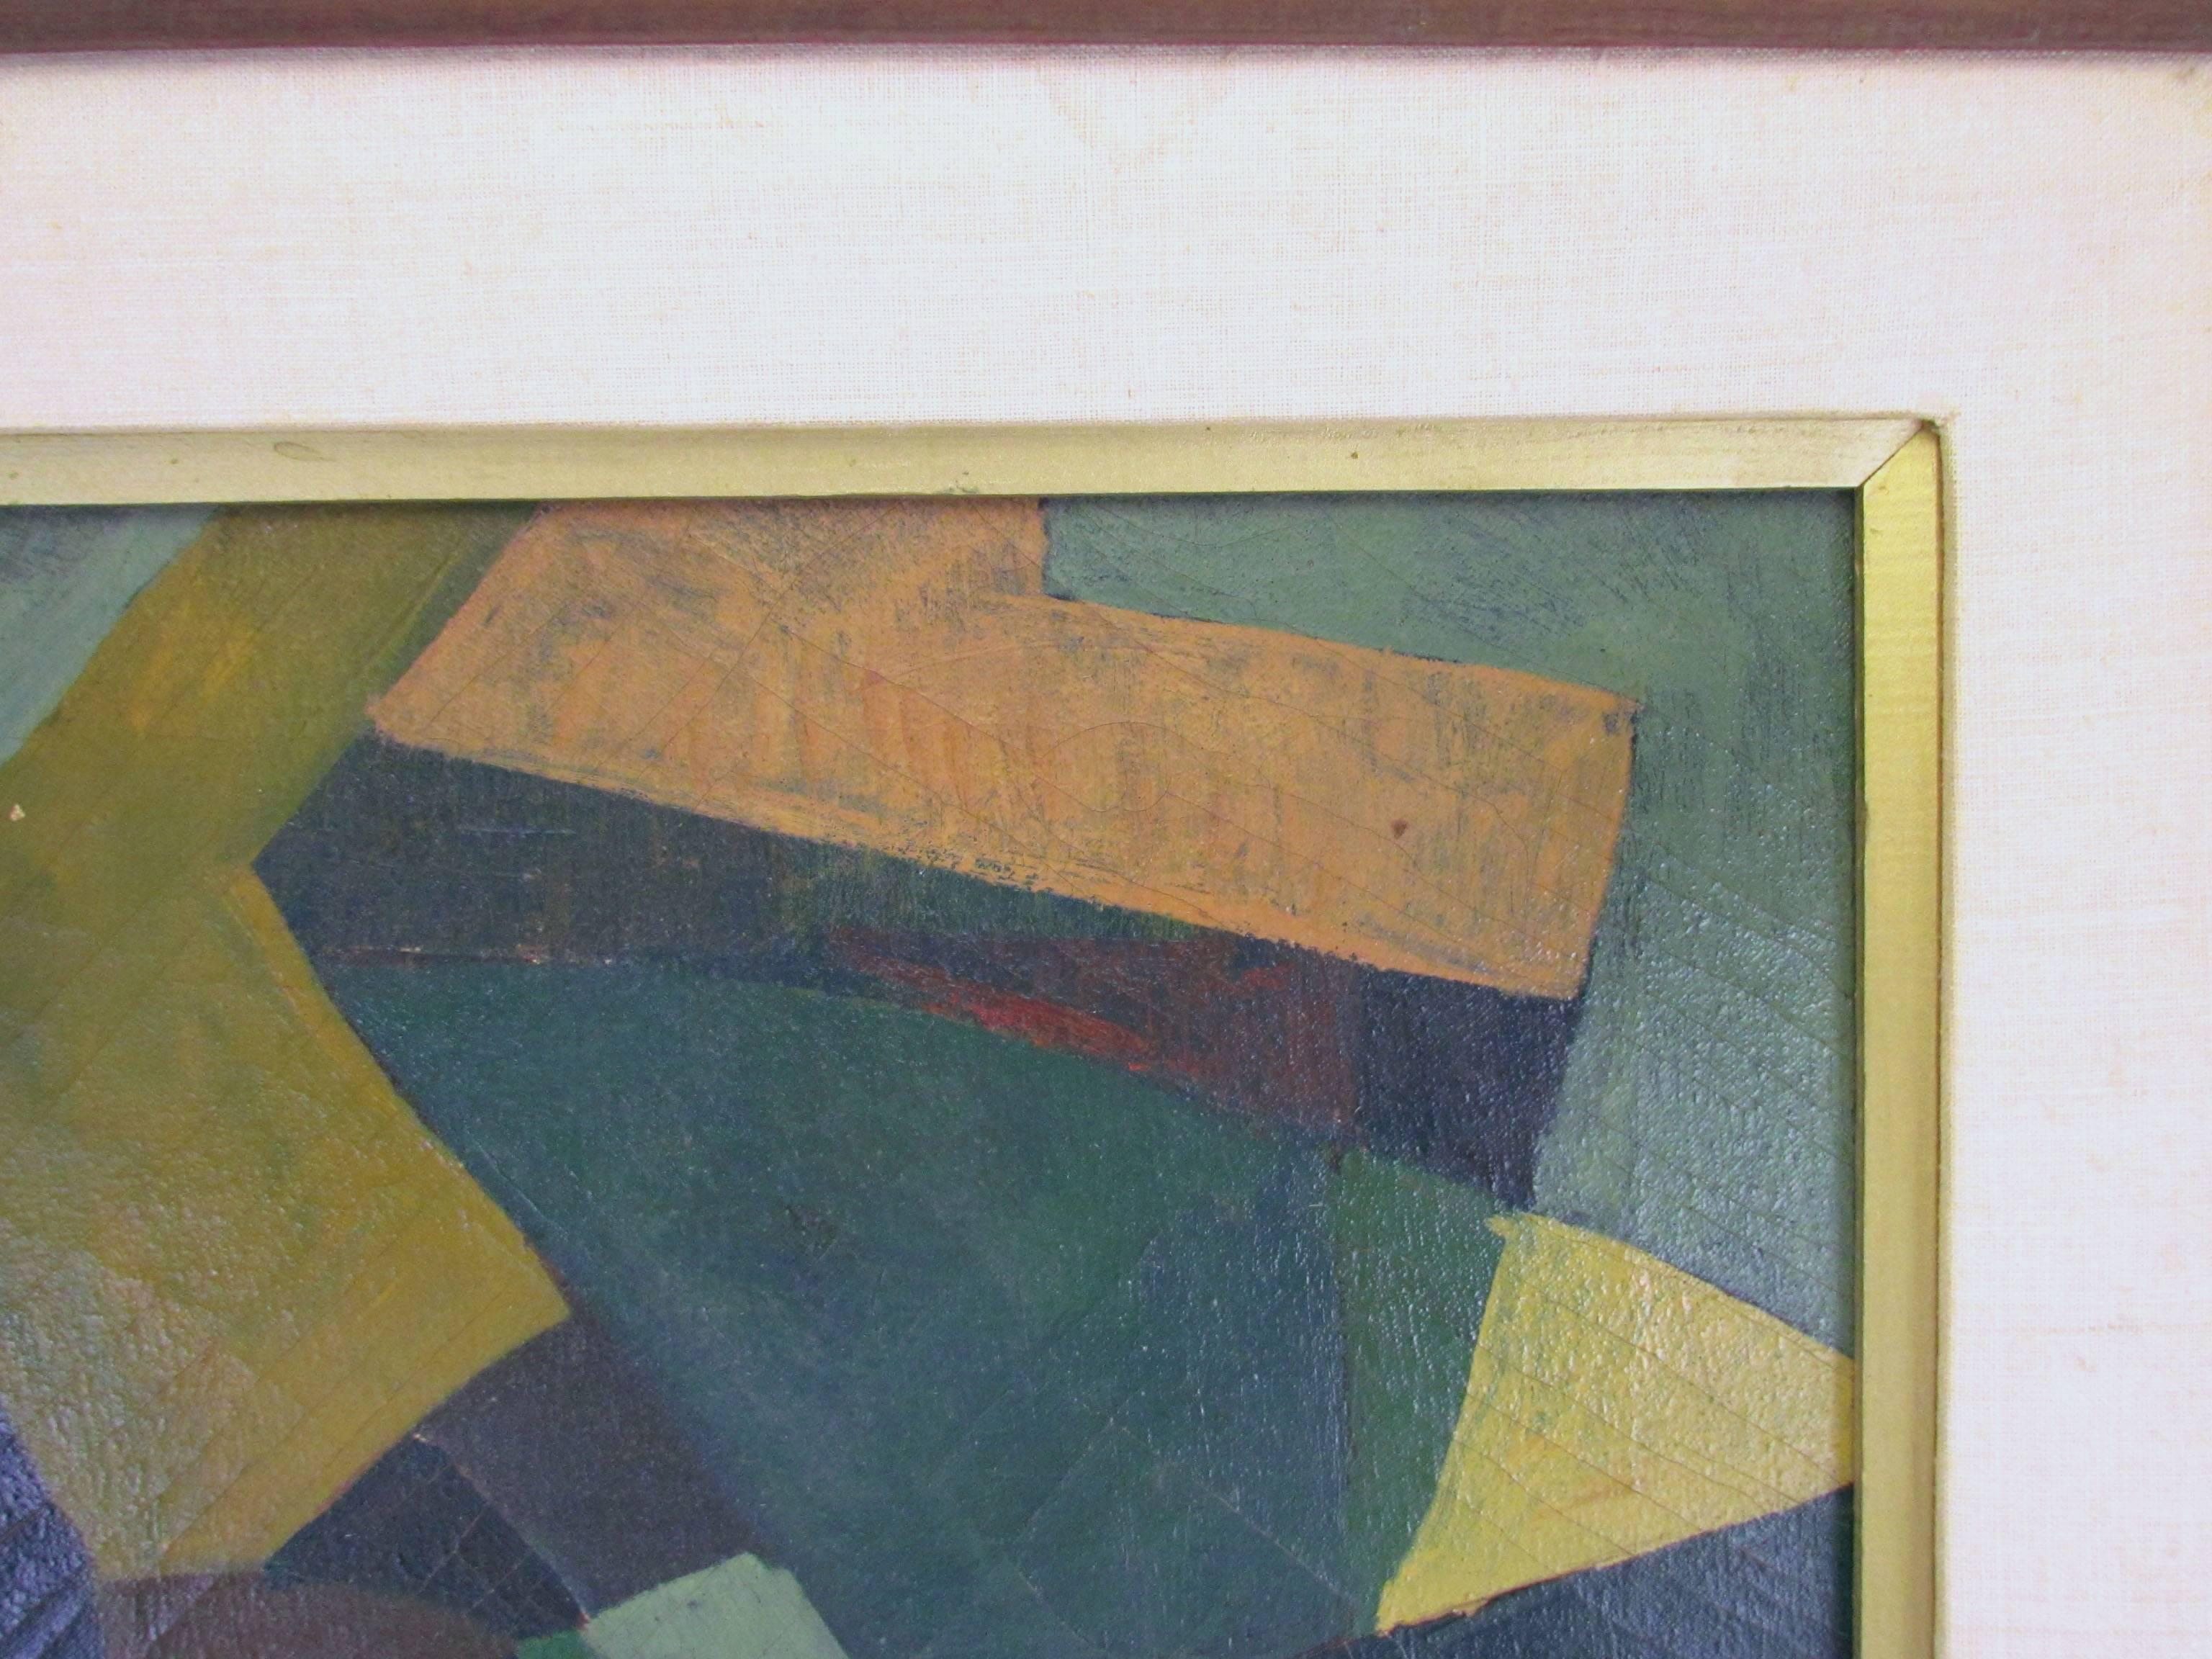 American Abstract Modernist Oil Painting by Harold Mesibov, Dated 1953